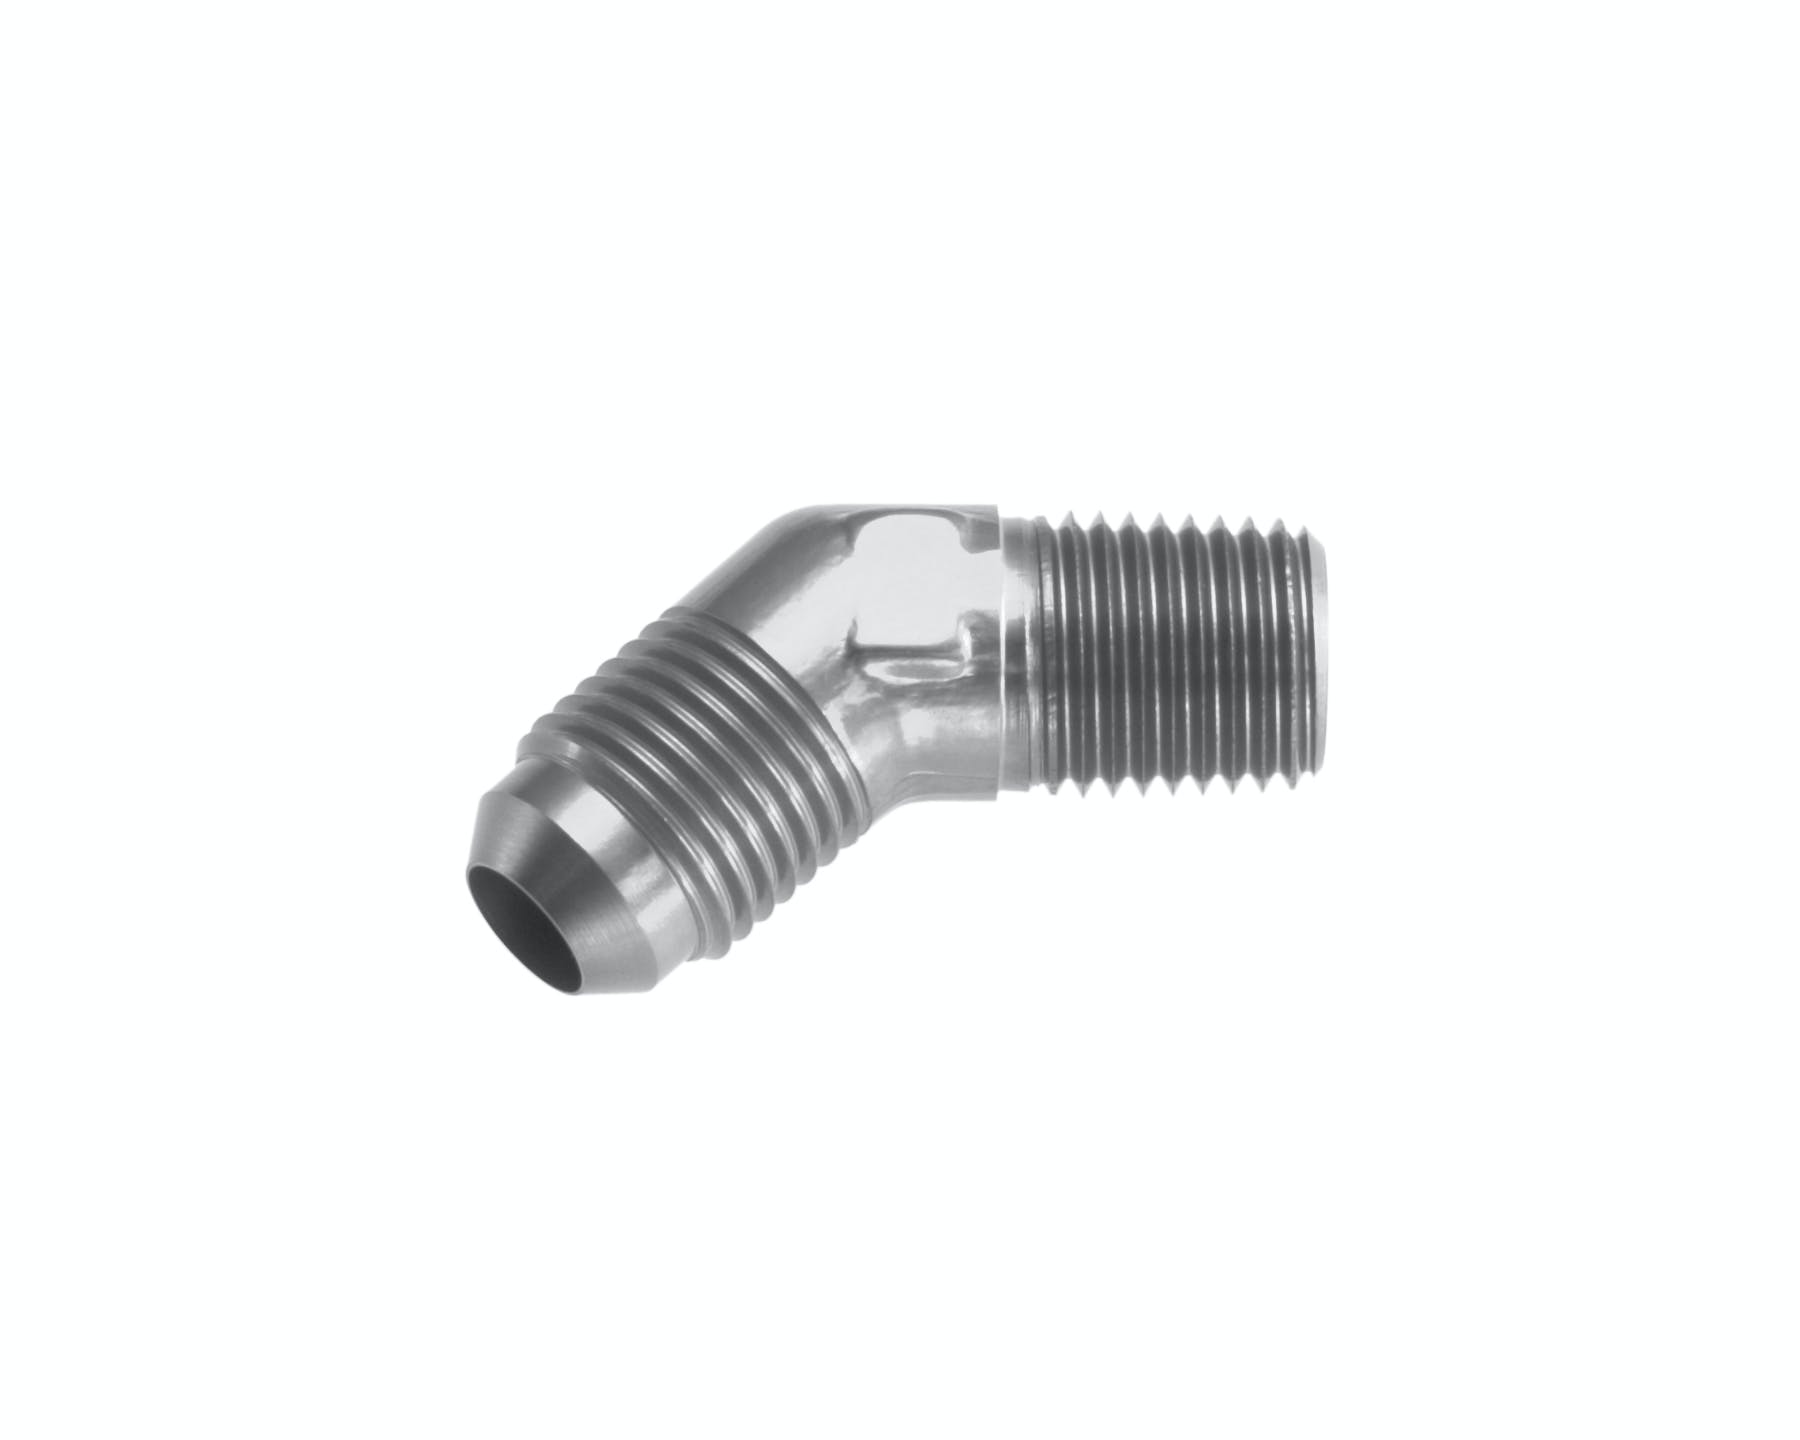 Redhorse Performance 823-10-12-5 -10 45 degree Male adapter to -12 (3/4in) NPT Male - clear